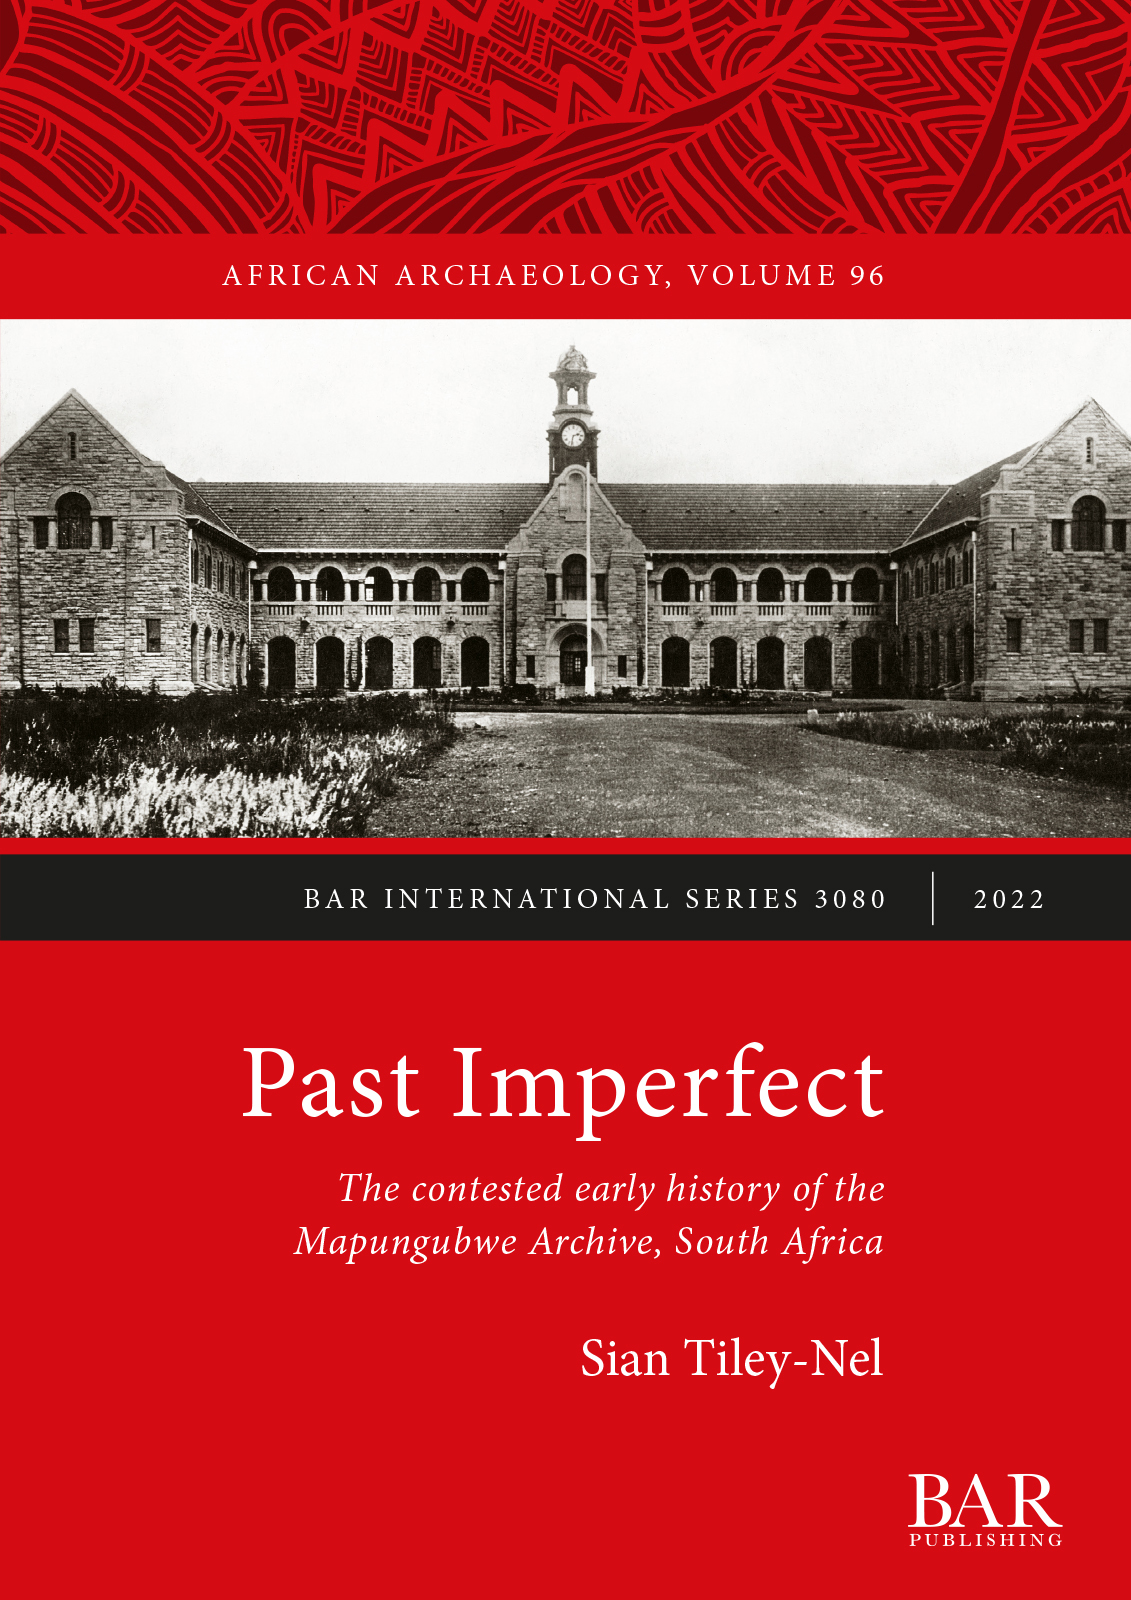 Mapungubwe Archive: 'Past Imperfect' by Sian Tiley-Nel book cover. Image: Author supplied / BAR Publishing